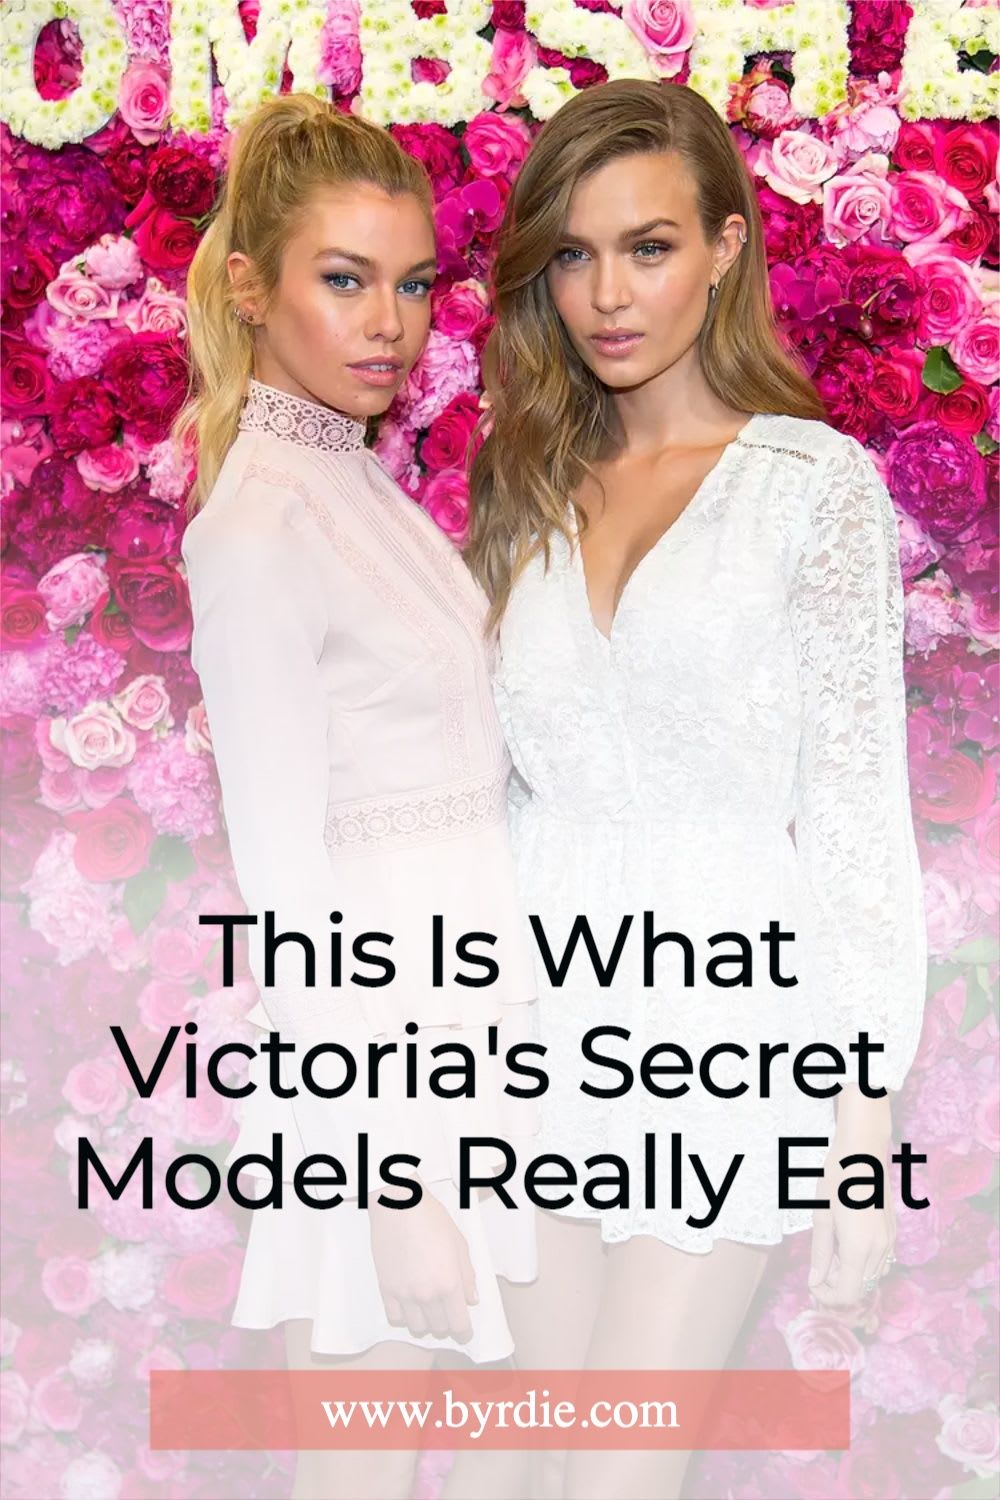 This Is What Victoria's Secret Models Really Eat